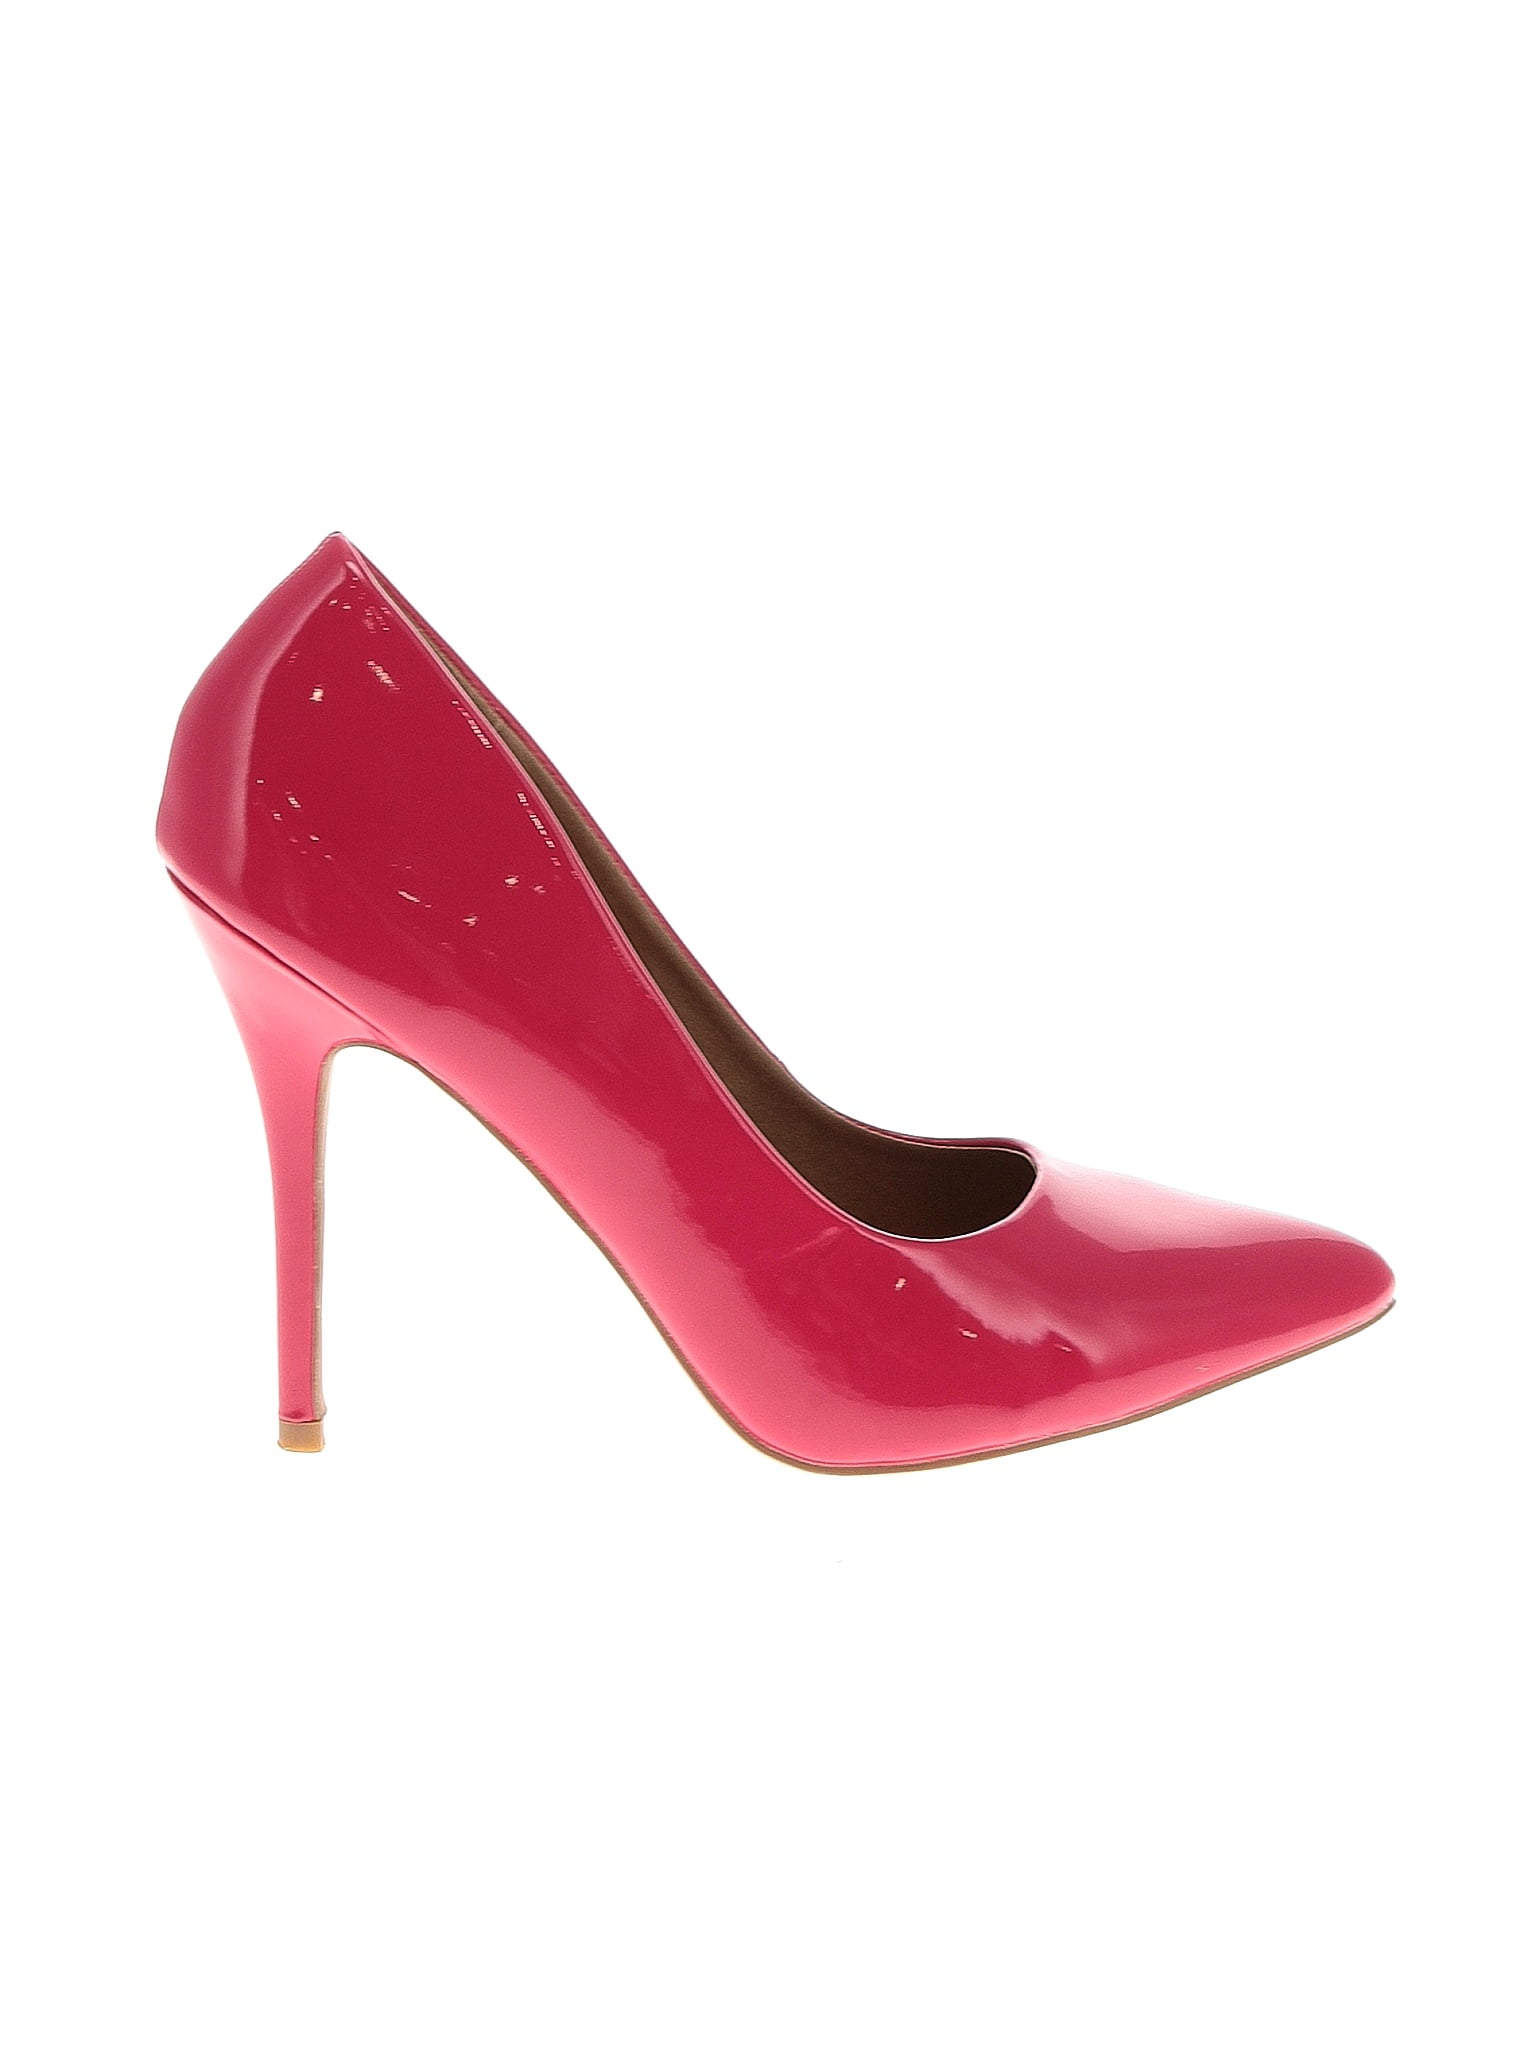 Riverberry Solid Red Pink Heels Size 10 - 43% off